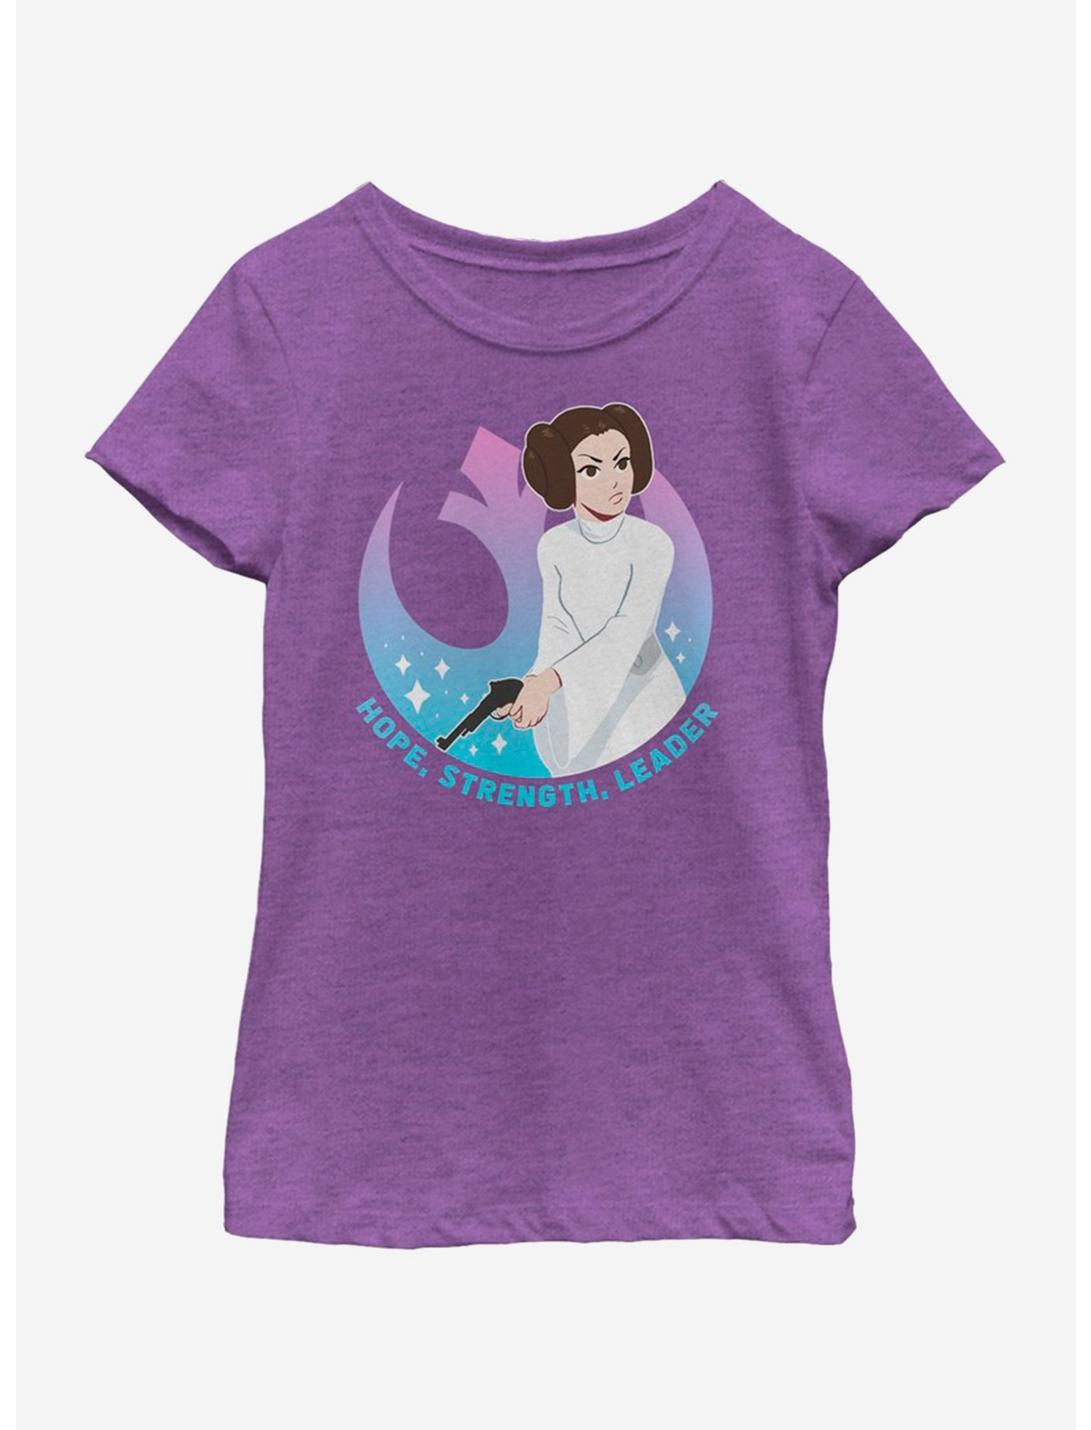 Star Wars Leia Leader Youth Girls T-Shirt, PURPLE BERRY, hi-res